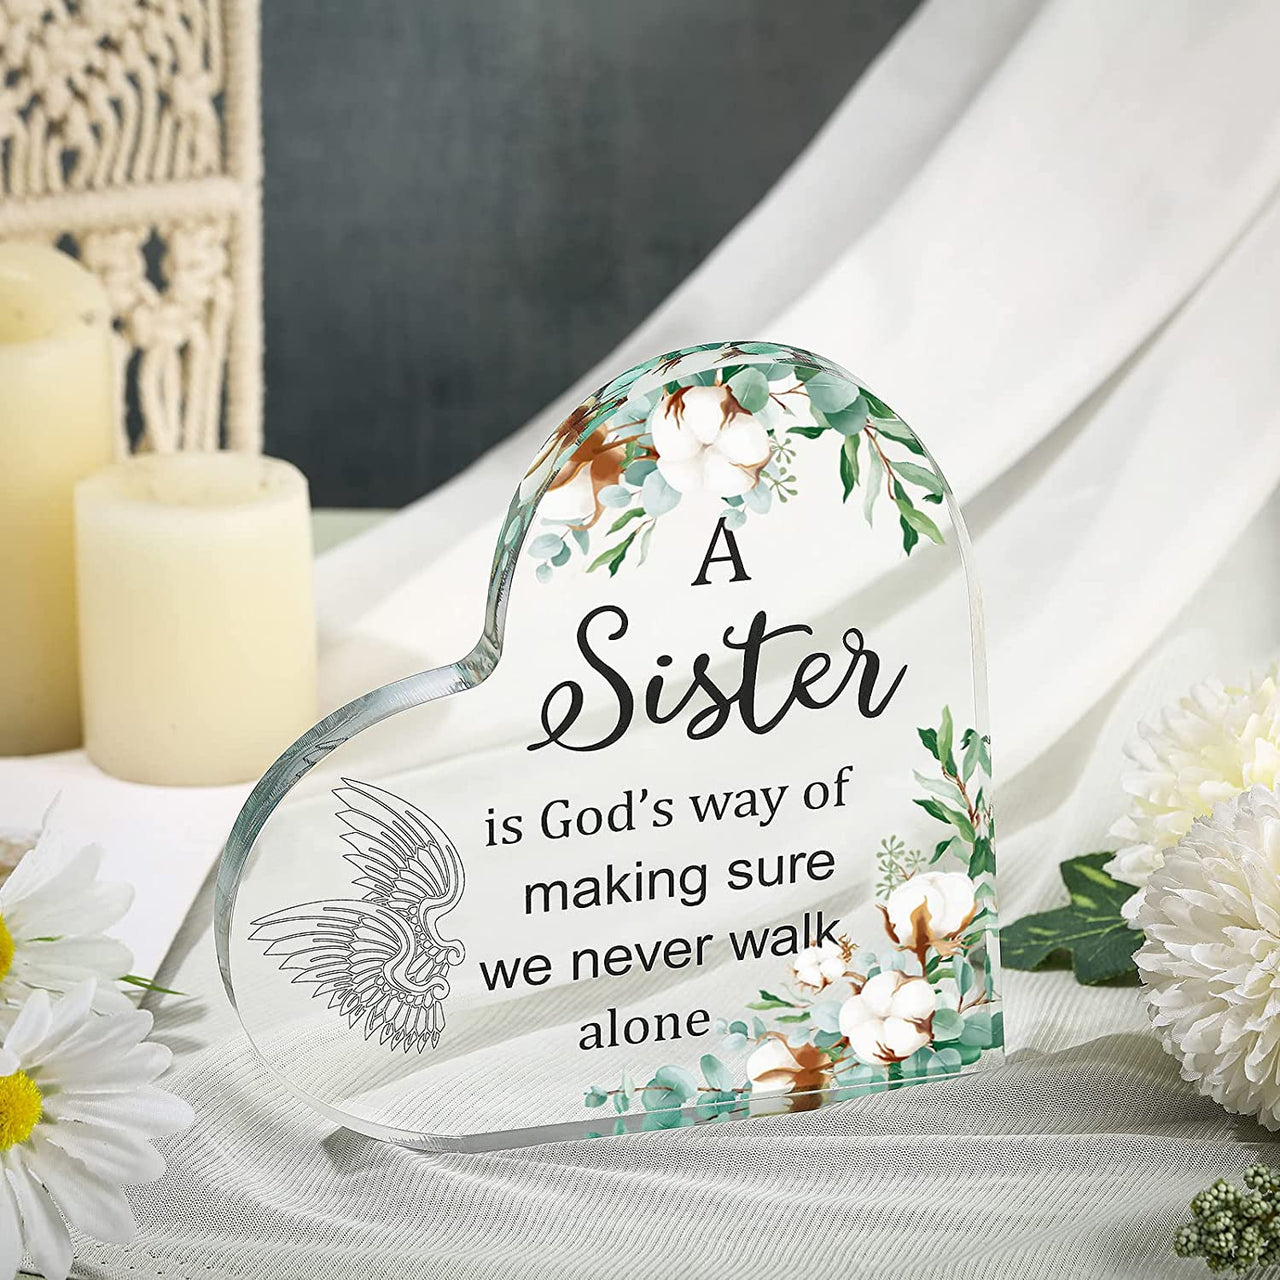 Yulejo Heart Sister - Gift from Sister - Keepsake, Paperweight, a Sister is God's Way of Making Sure We Never Walk Alone